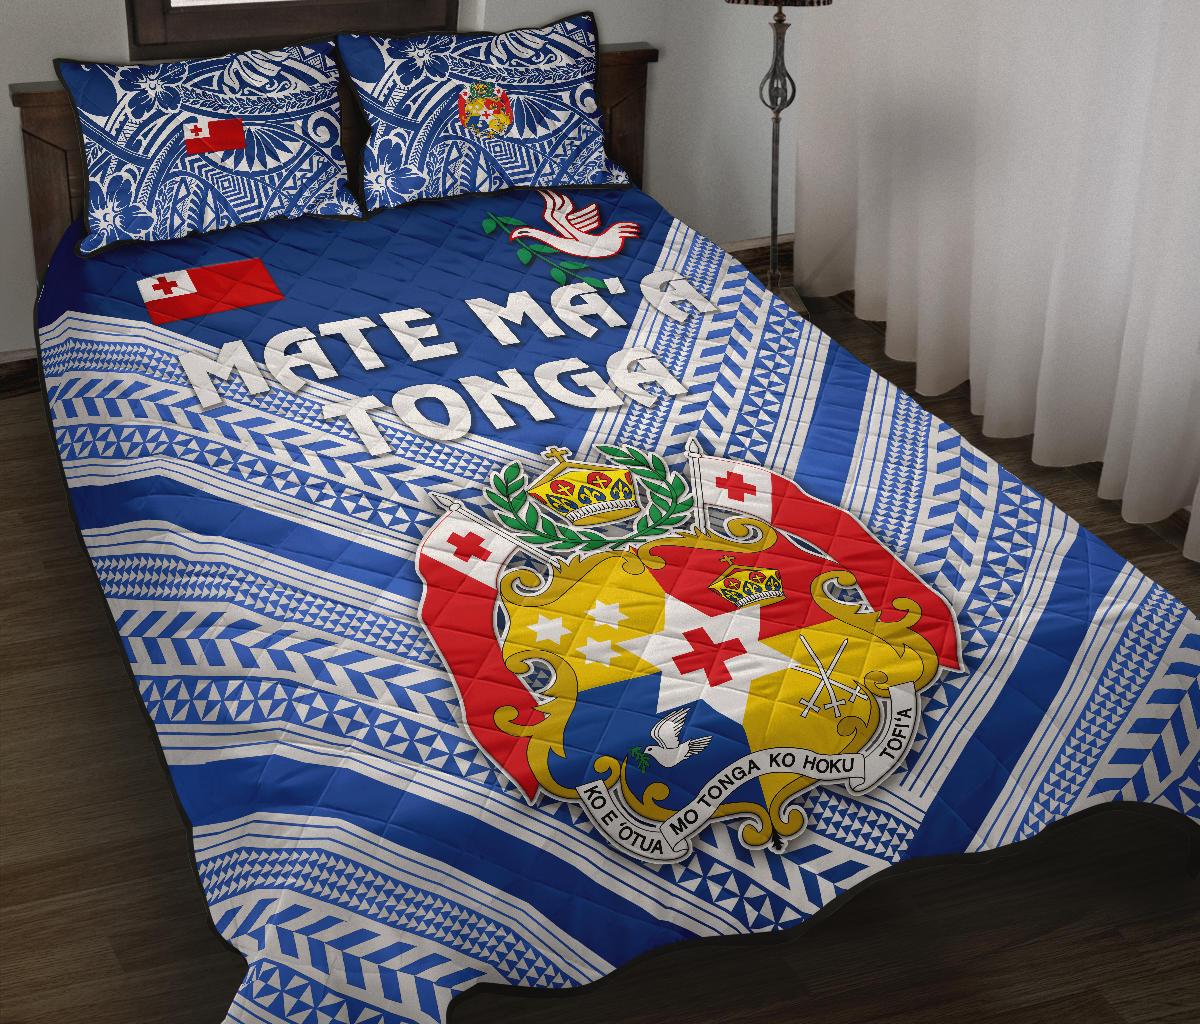 Mate Ma'a Tonga Rugby Quilt Bed Set Polynesian Creative Style - Blue Art - Polynesian Pride